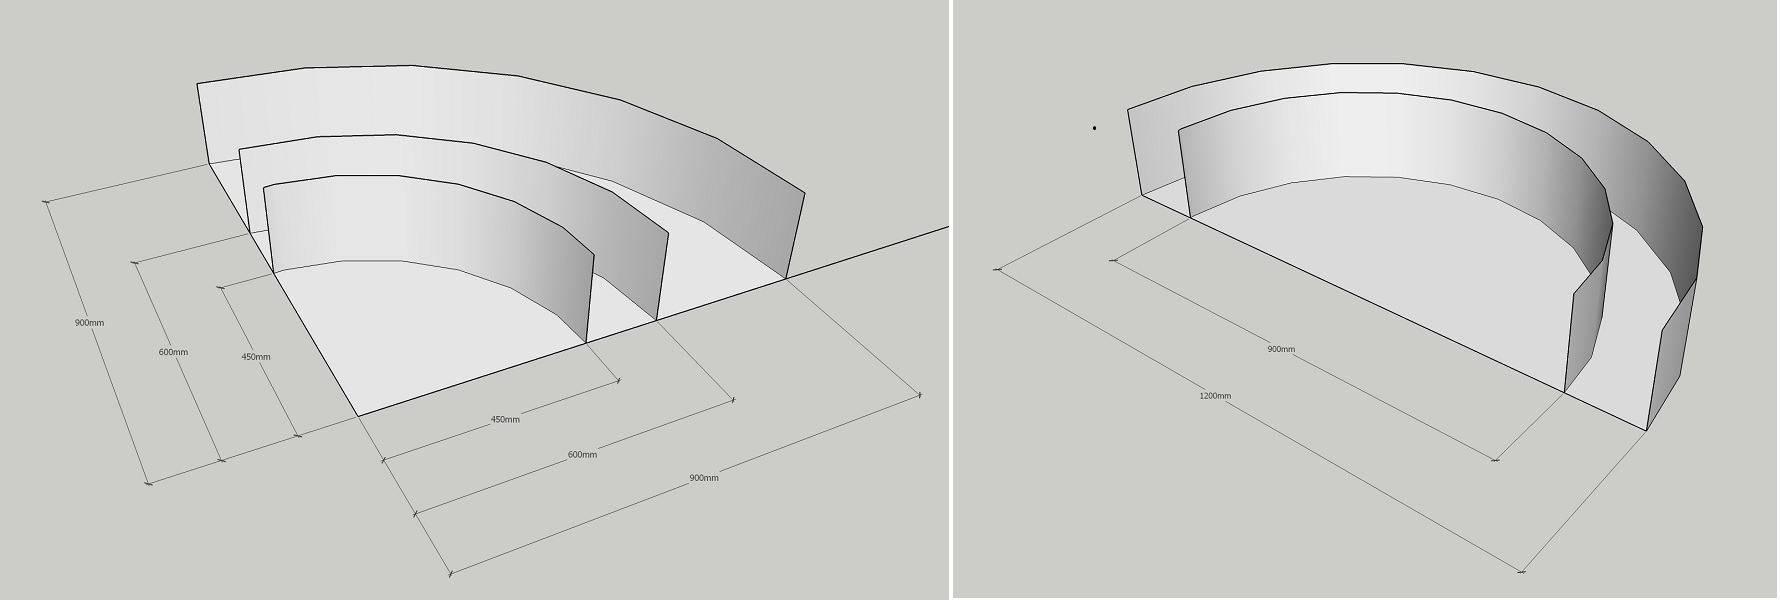 curved edging section layouts